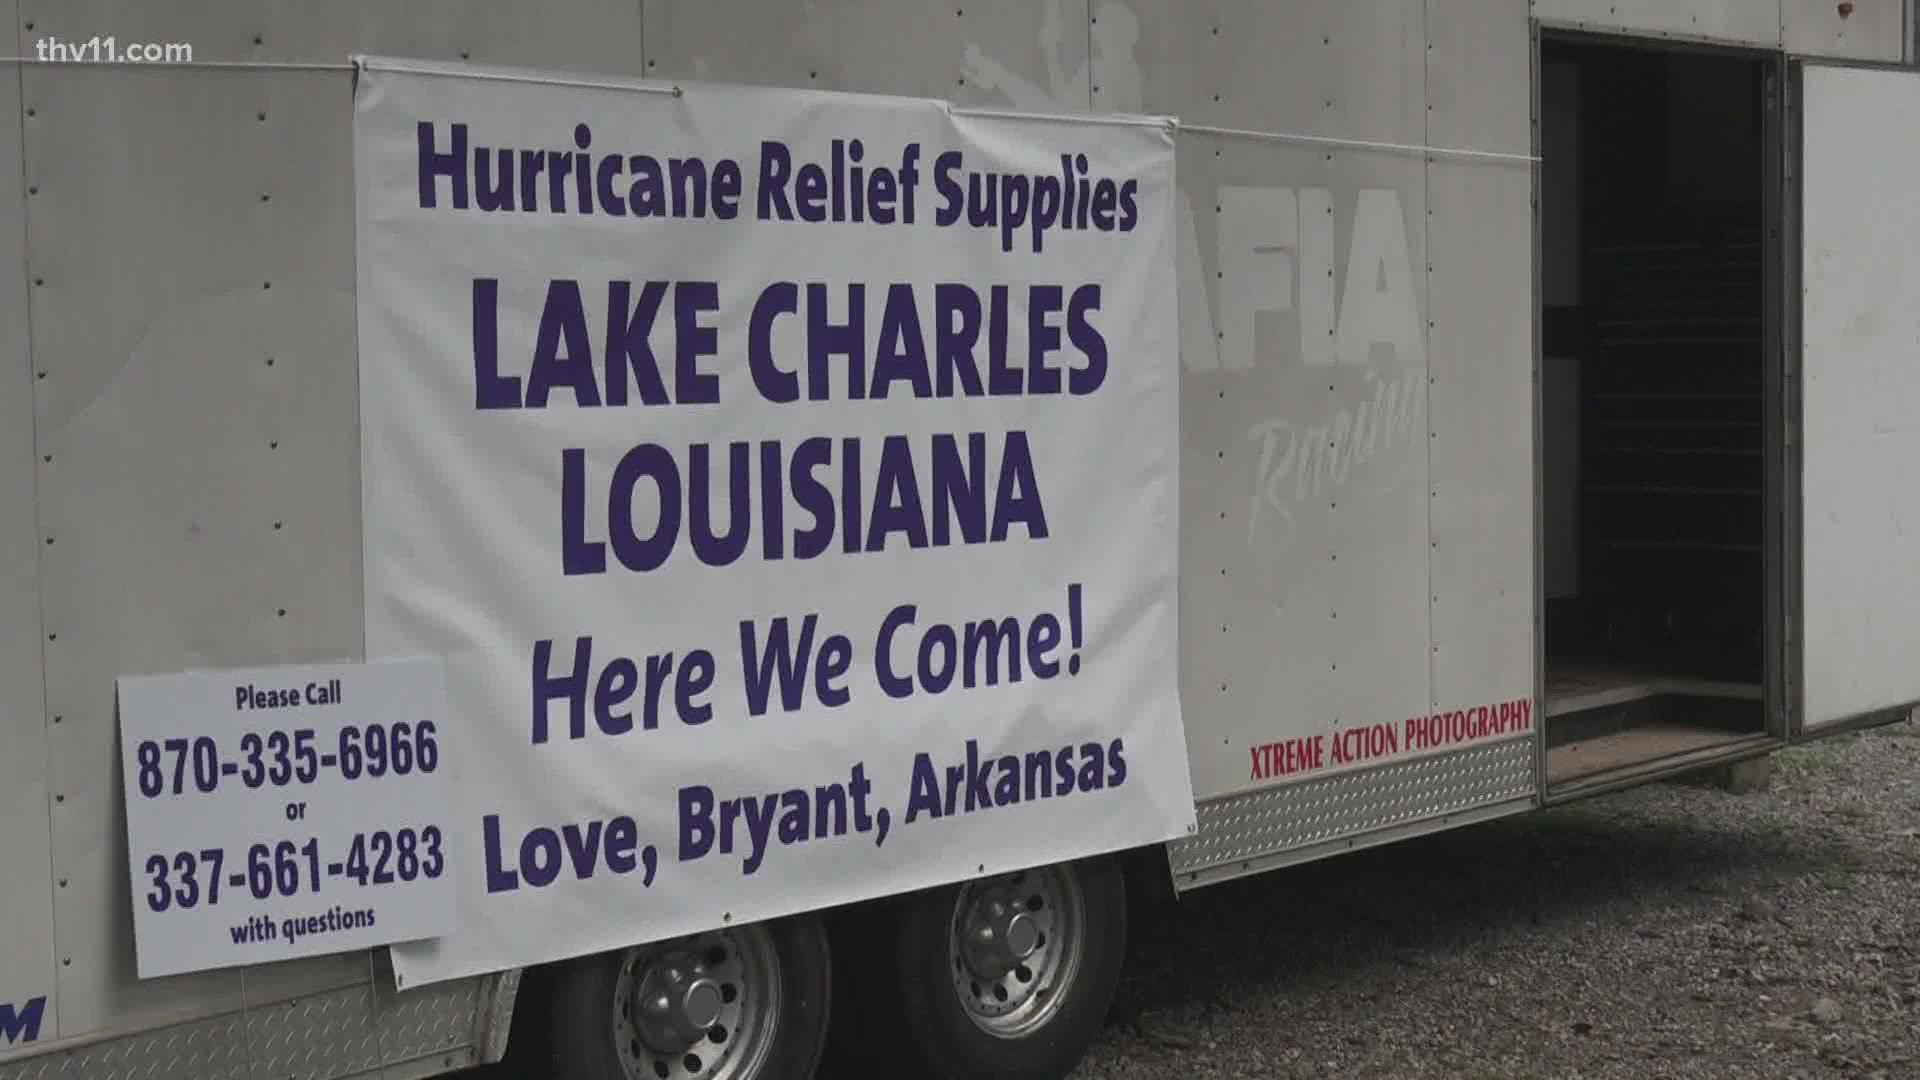 A Bryant woman needs your help as she works to help hundreds of people impacted by Hurricane Laura. The project she's heading up hits close to home.